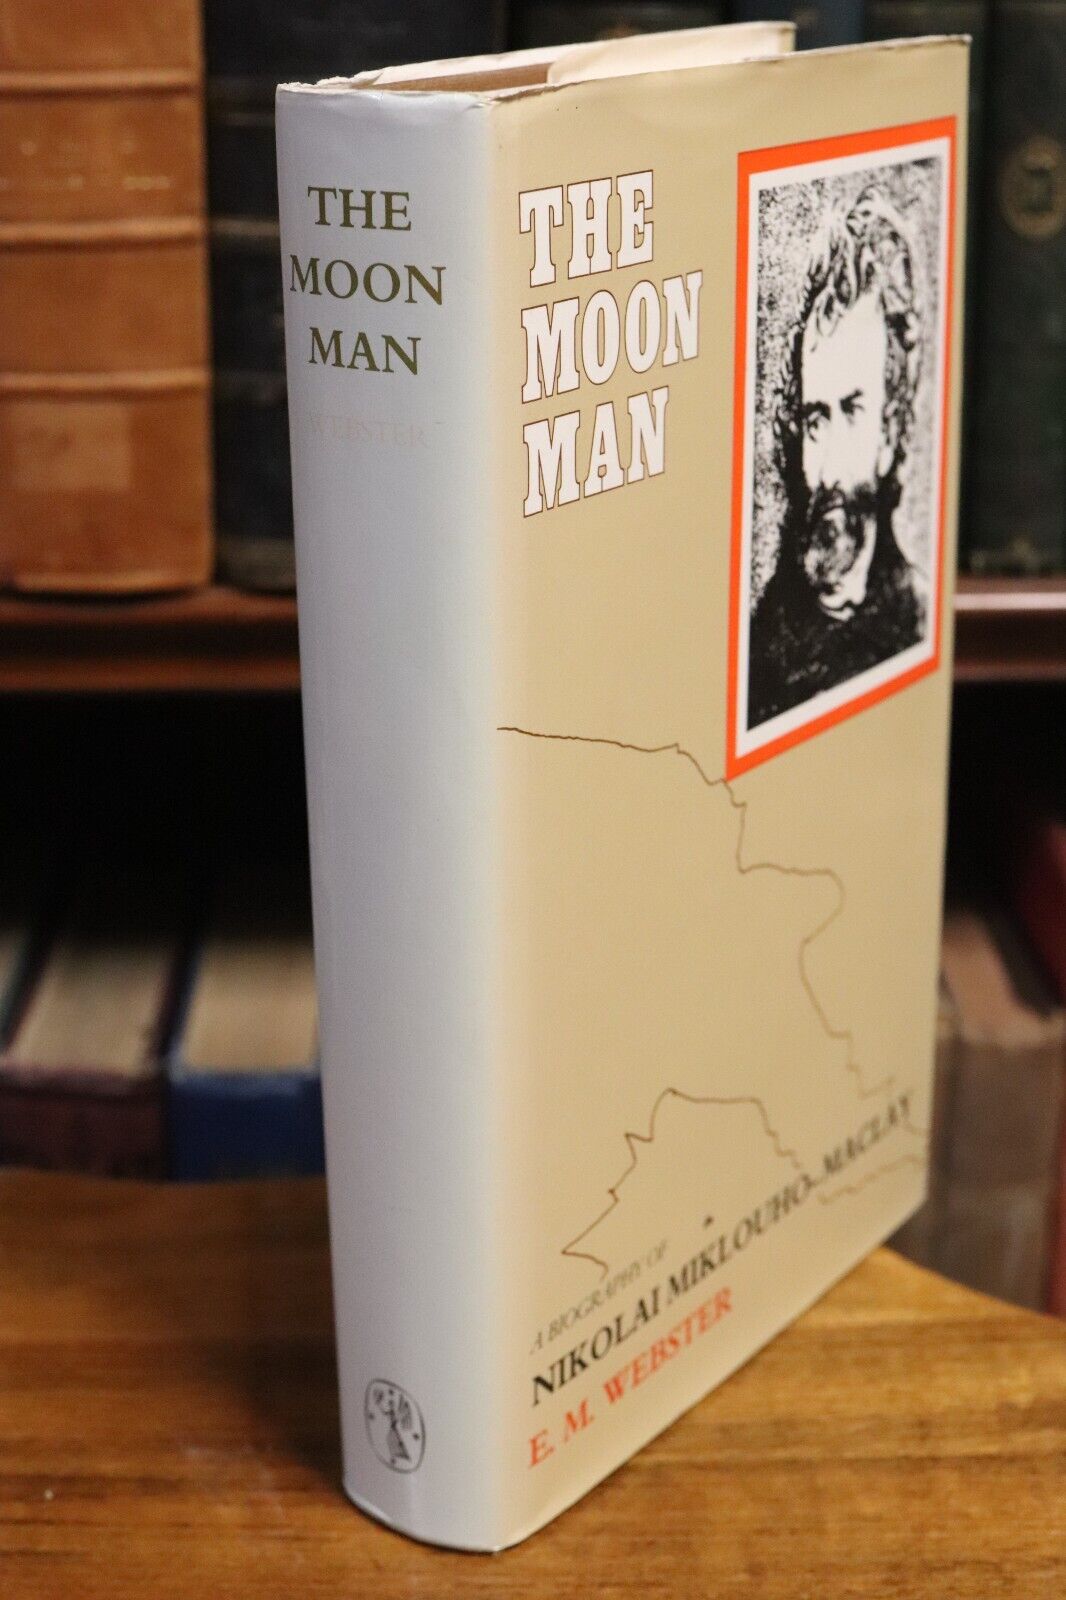 The Moon Man by Elsie M Webster - 1984 - Biographical History Book - 0